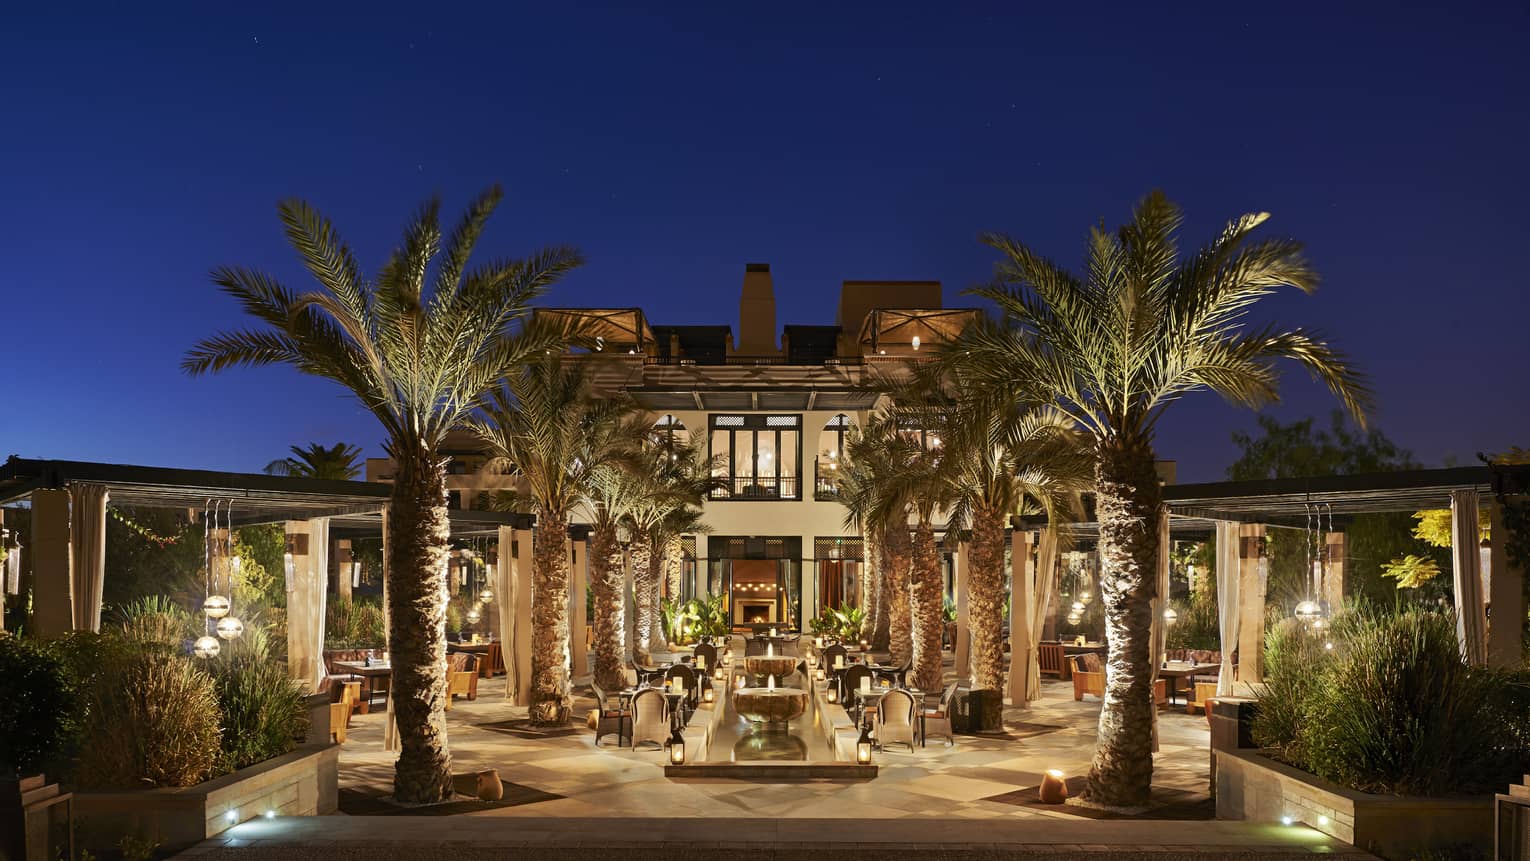 Bleu d'Orange large outdoor patio with lights and palm trees under night sky